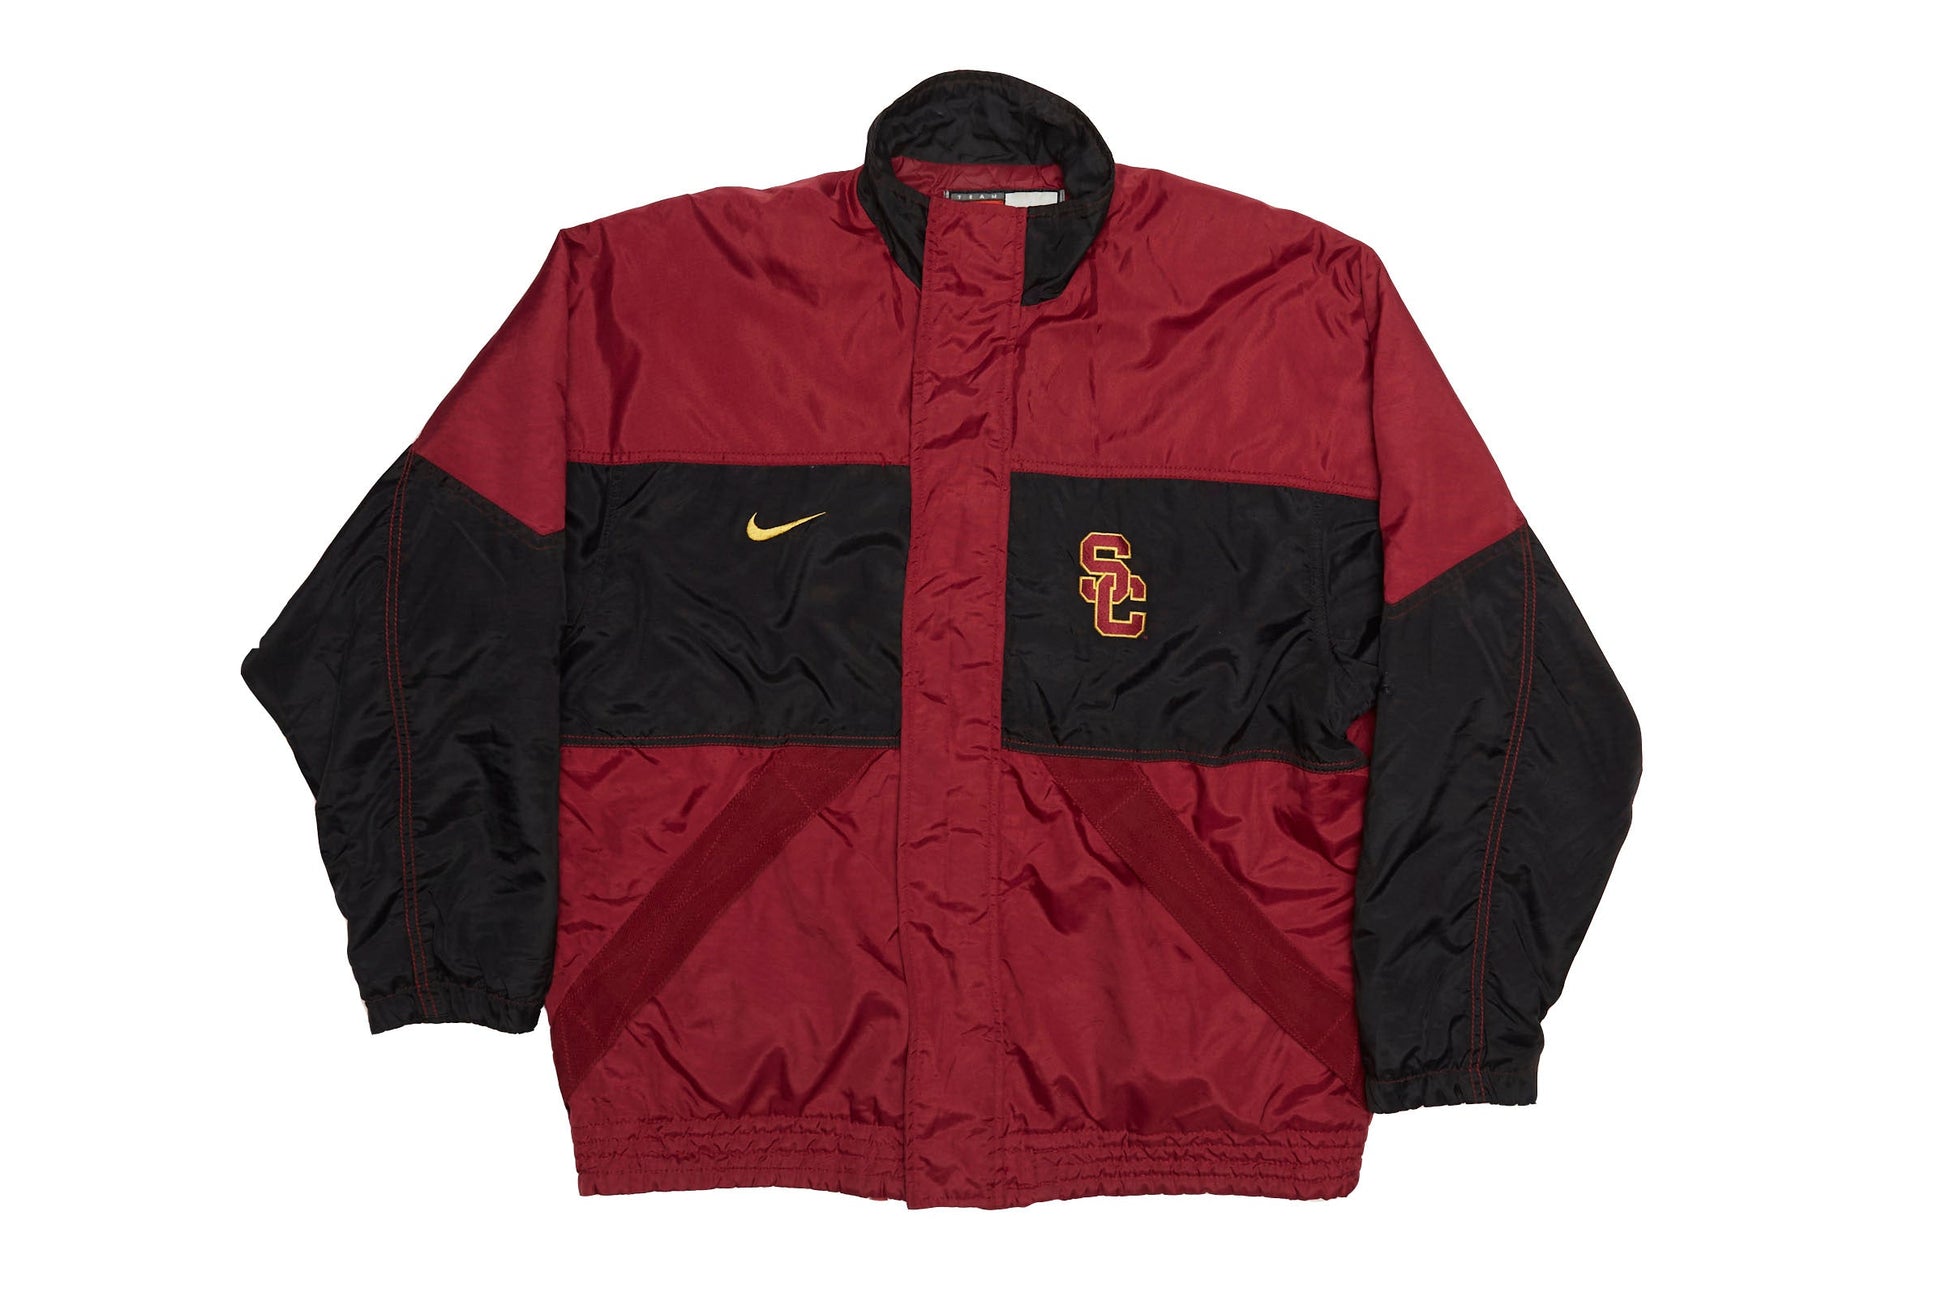 Mens Nike Insulated Jacket - L